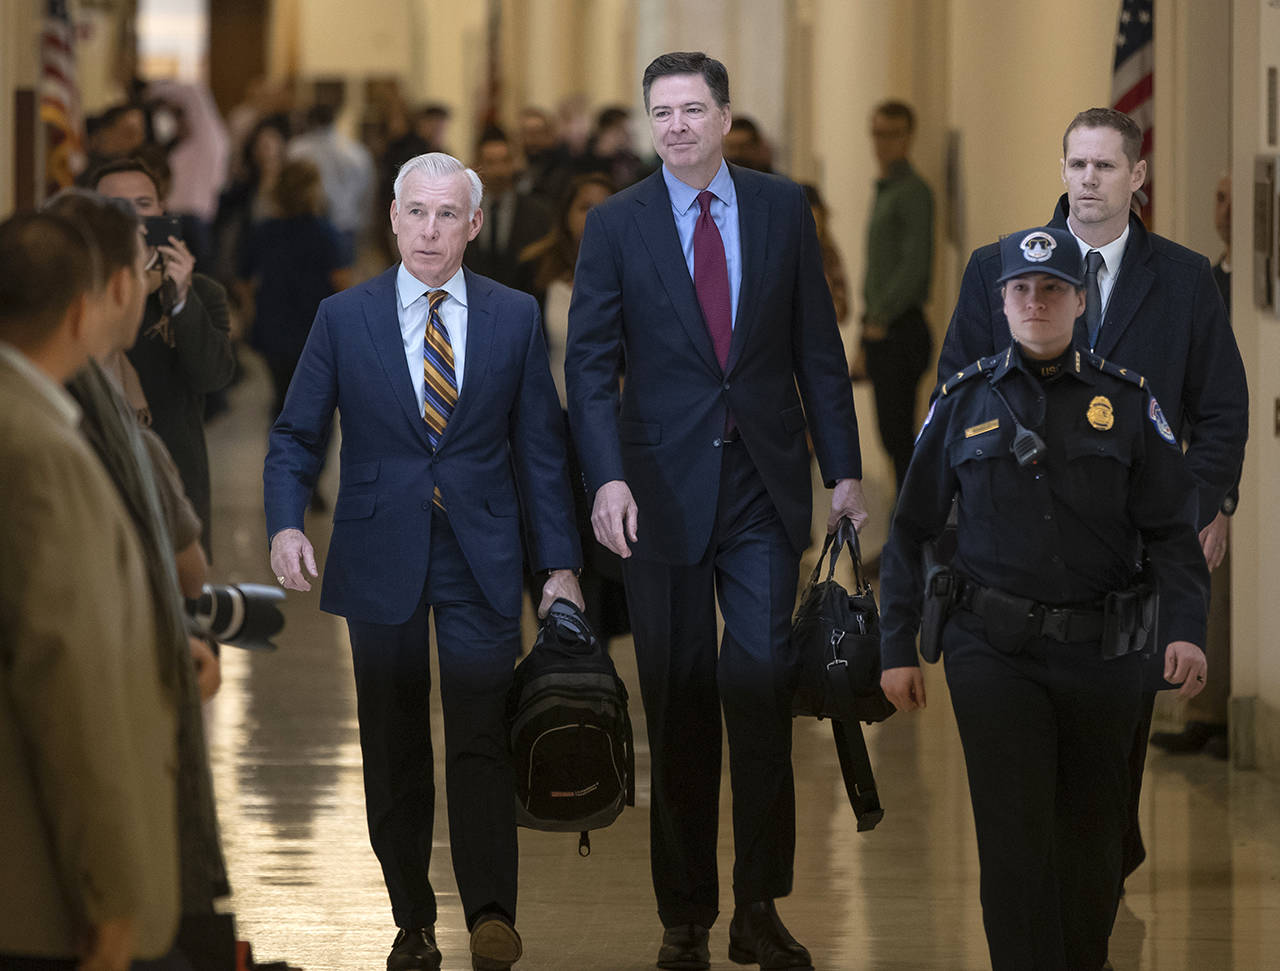 Former FBI Director James Comey and his attorney (David Kelley, left) arrive to testify under subpoena behind closed doors before the House Judiciary and Oversight Committee on Capitol Hill in Washington on Friday. (AP Photo/J. Scott Applewhite)